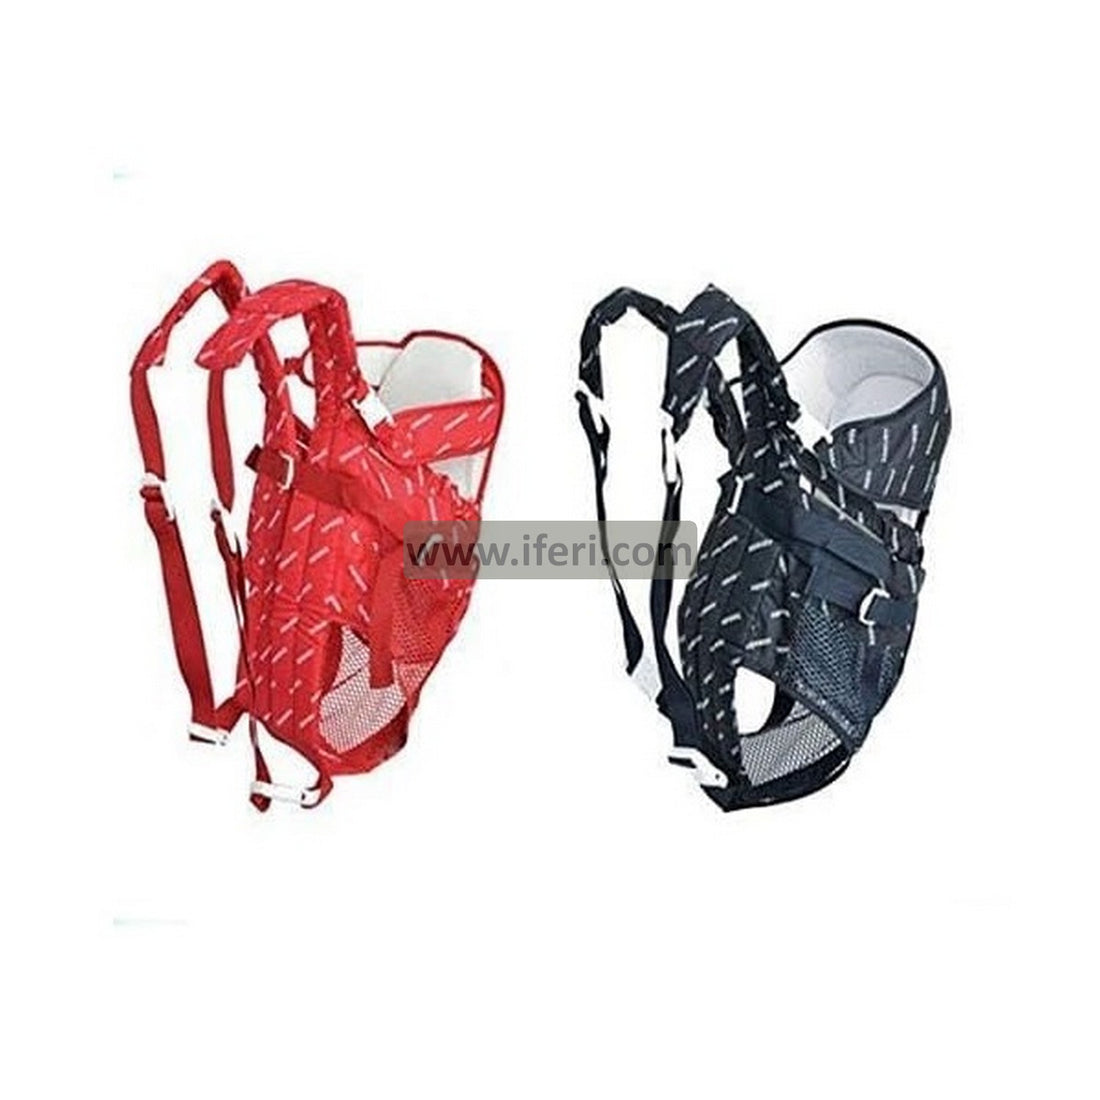 Buy Baby Sling Carrier from iferi.com in Bangladesh